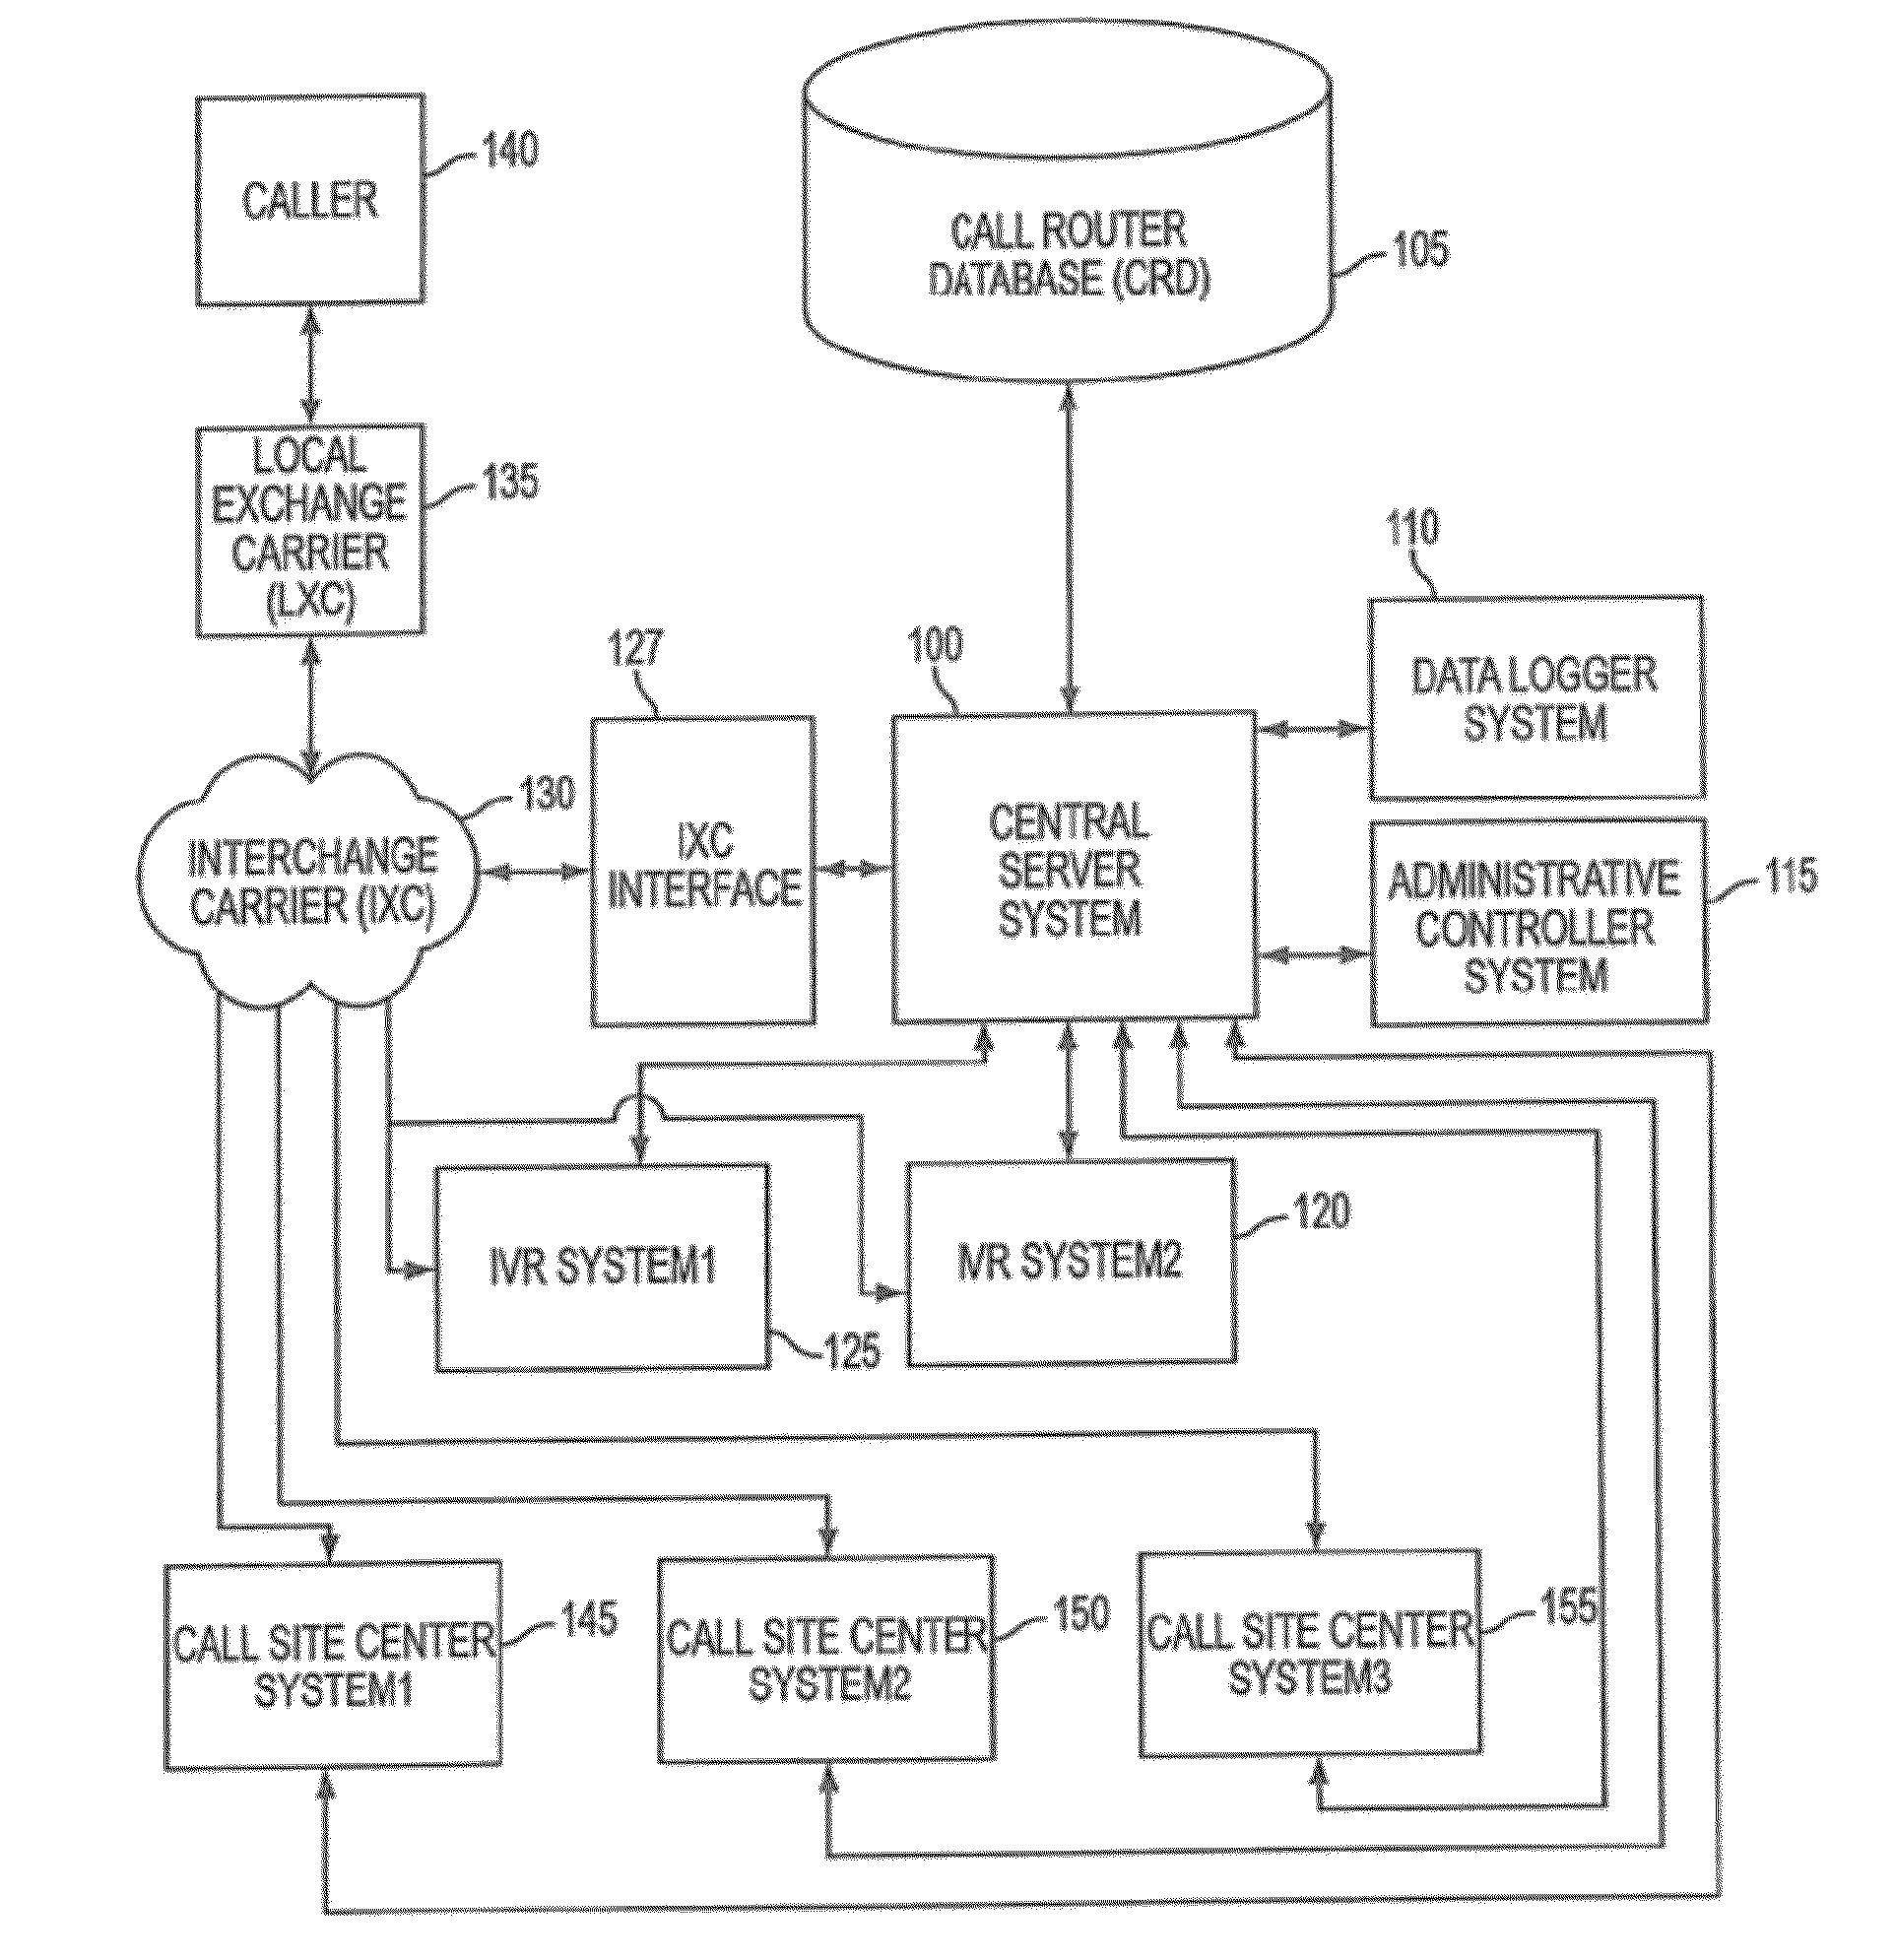 System and method of intelligent call routing for cross sell offer selection based on optimization parameters or account-level data